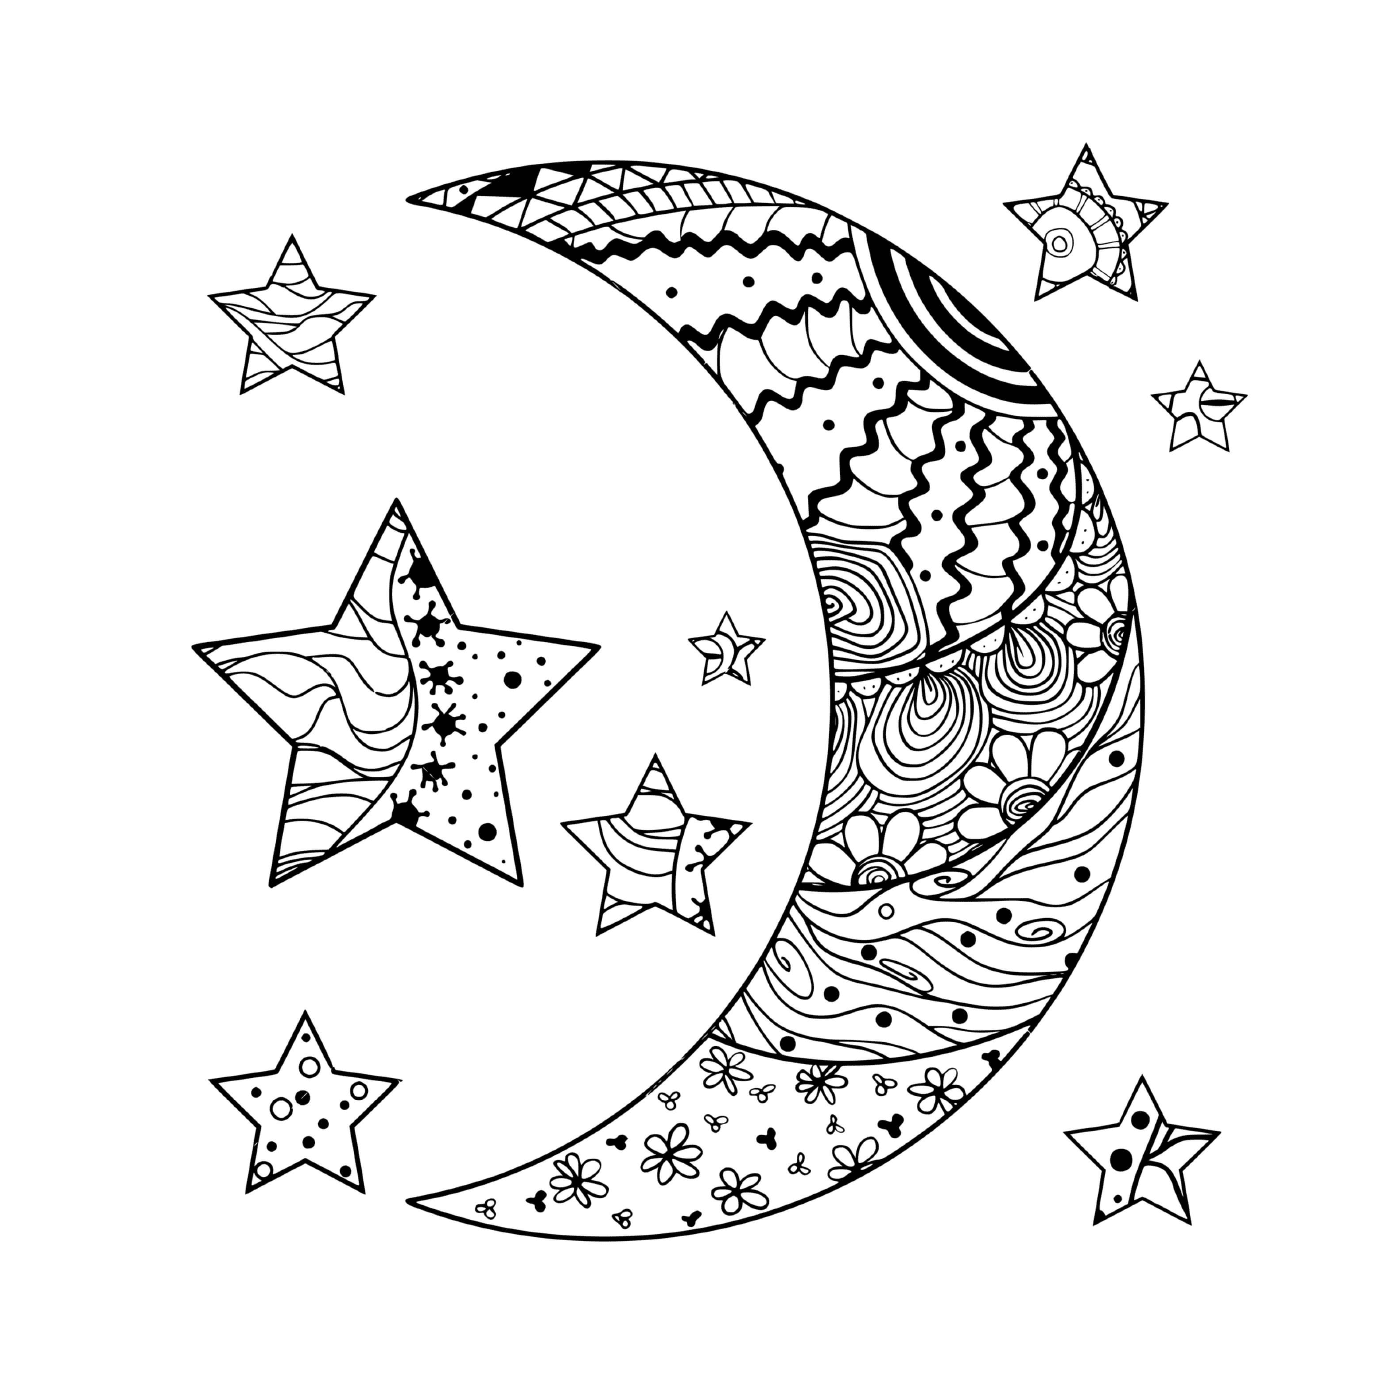  Moon Crescent and Stars with Abstract Patterns 